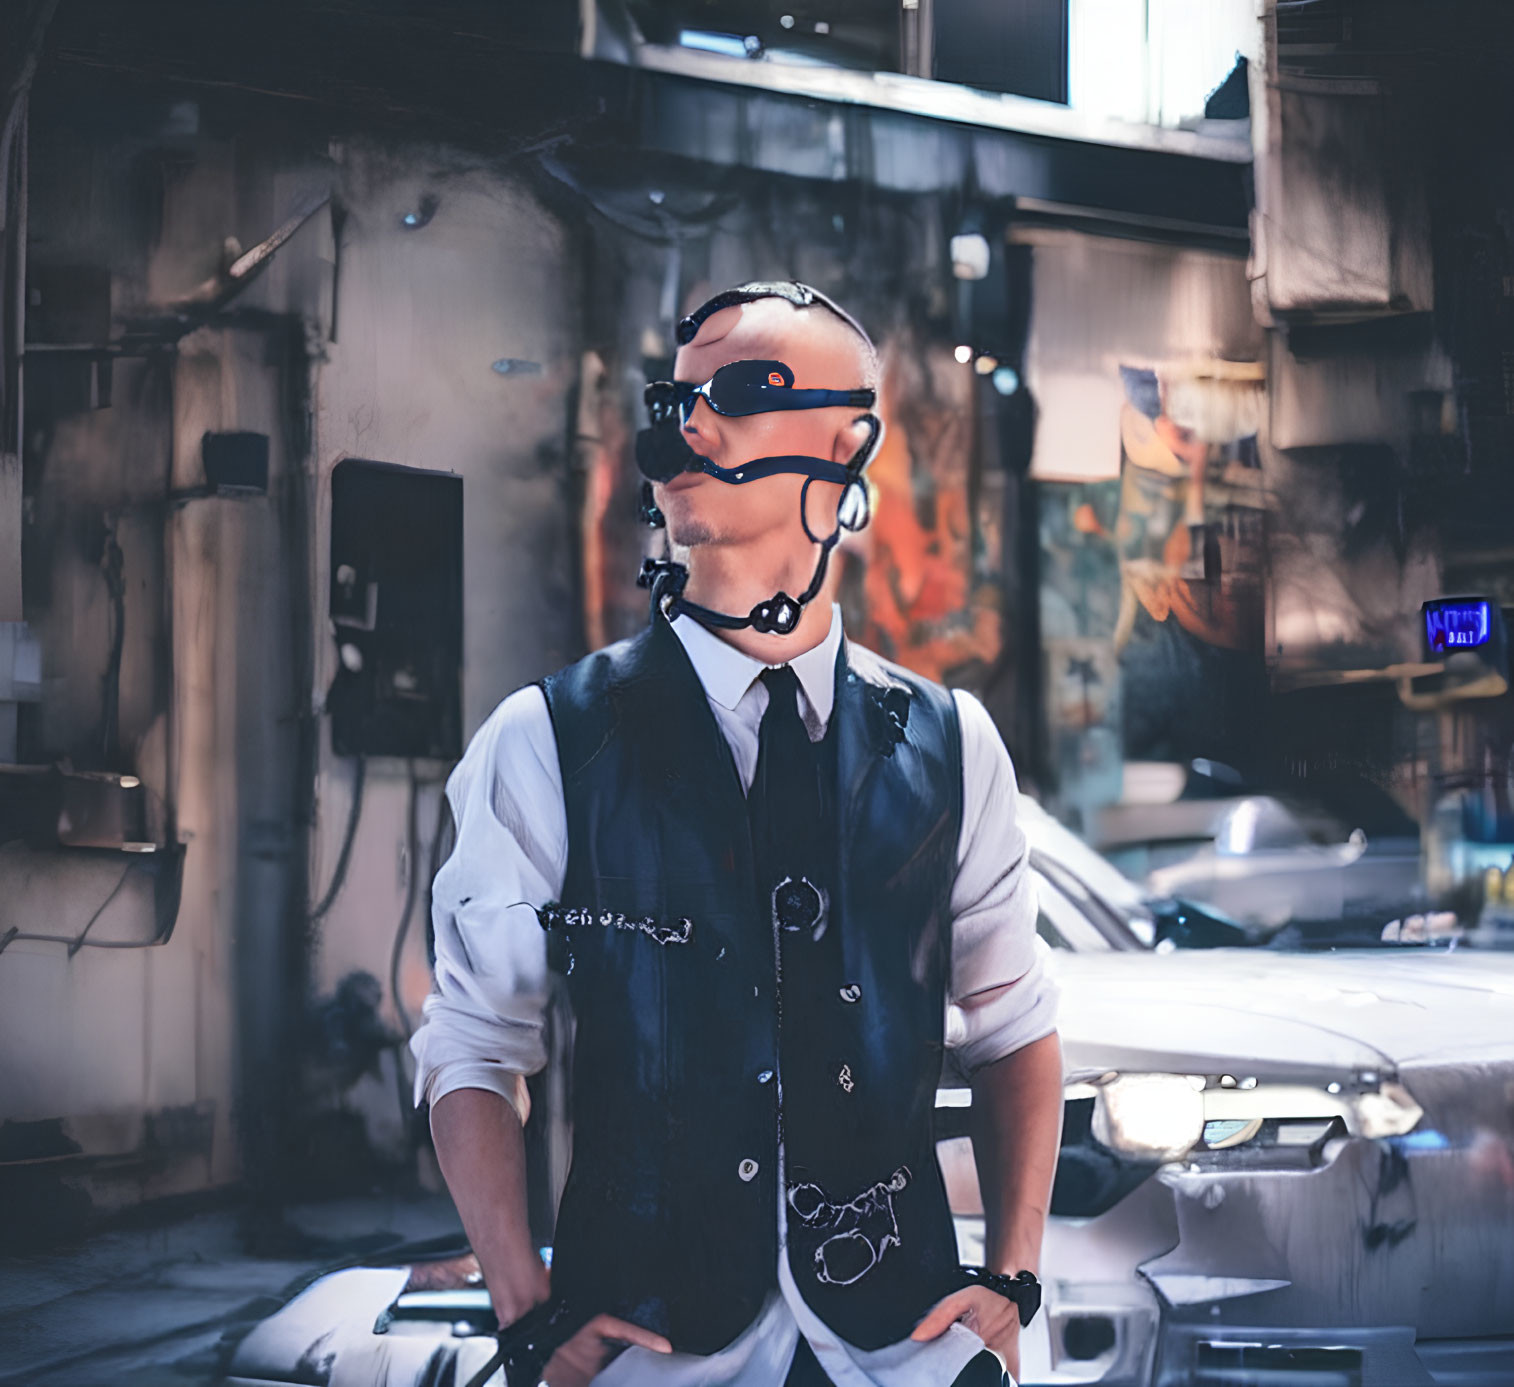 Urban alley scene with man in cyberpunk goggles and headset.